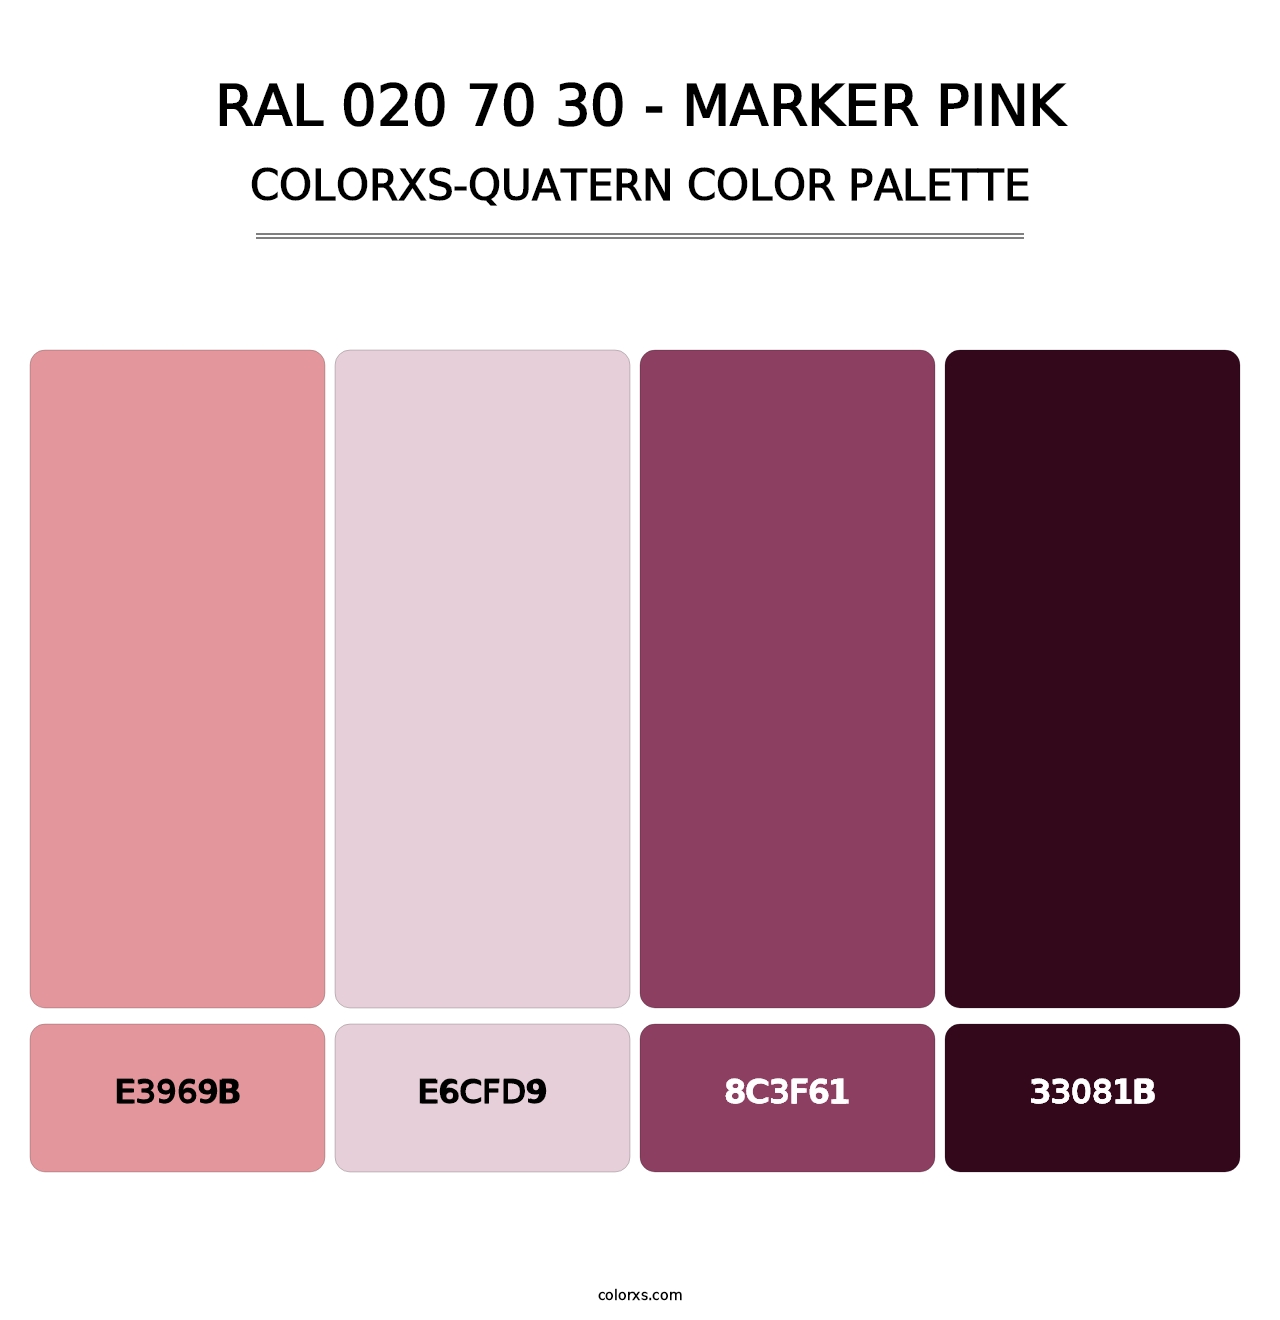 RAL 020 70 30 - Marker Pink - Colorxs Quatern Palette